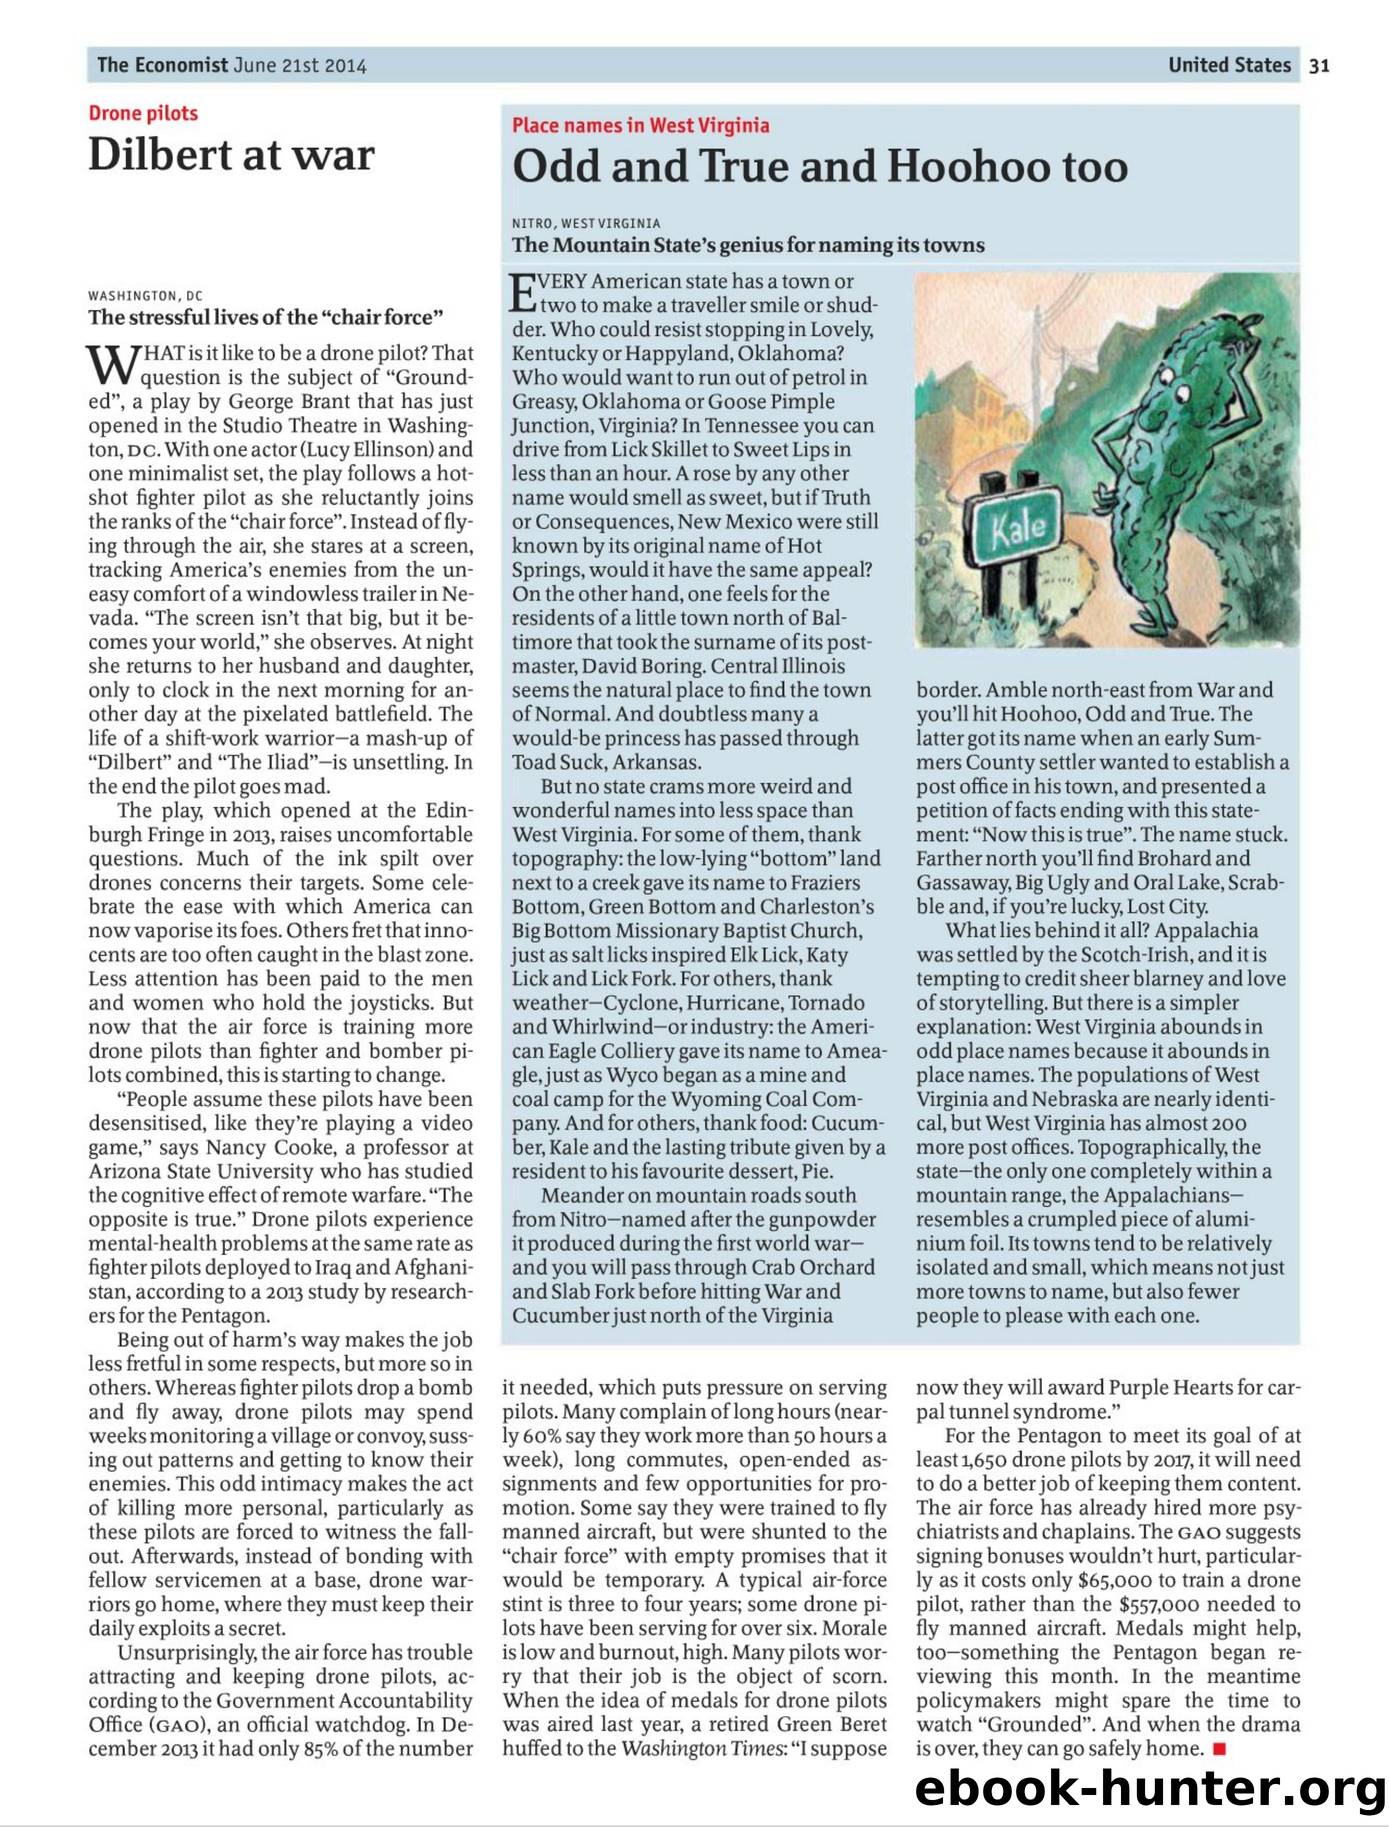 The Economist by N.8892 06-21-2014